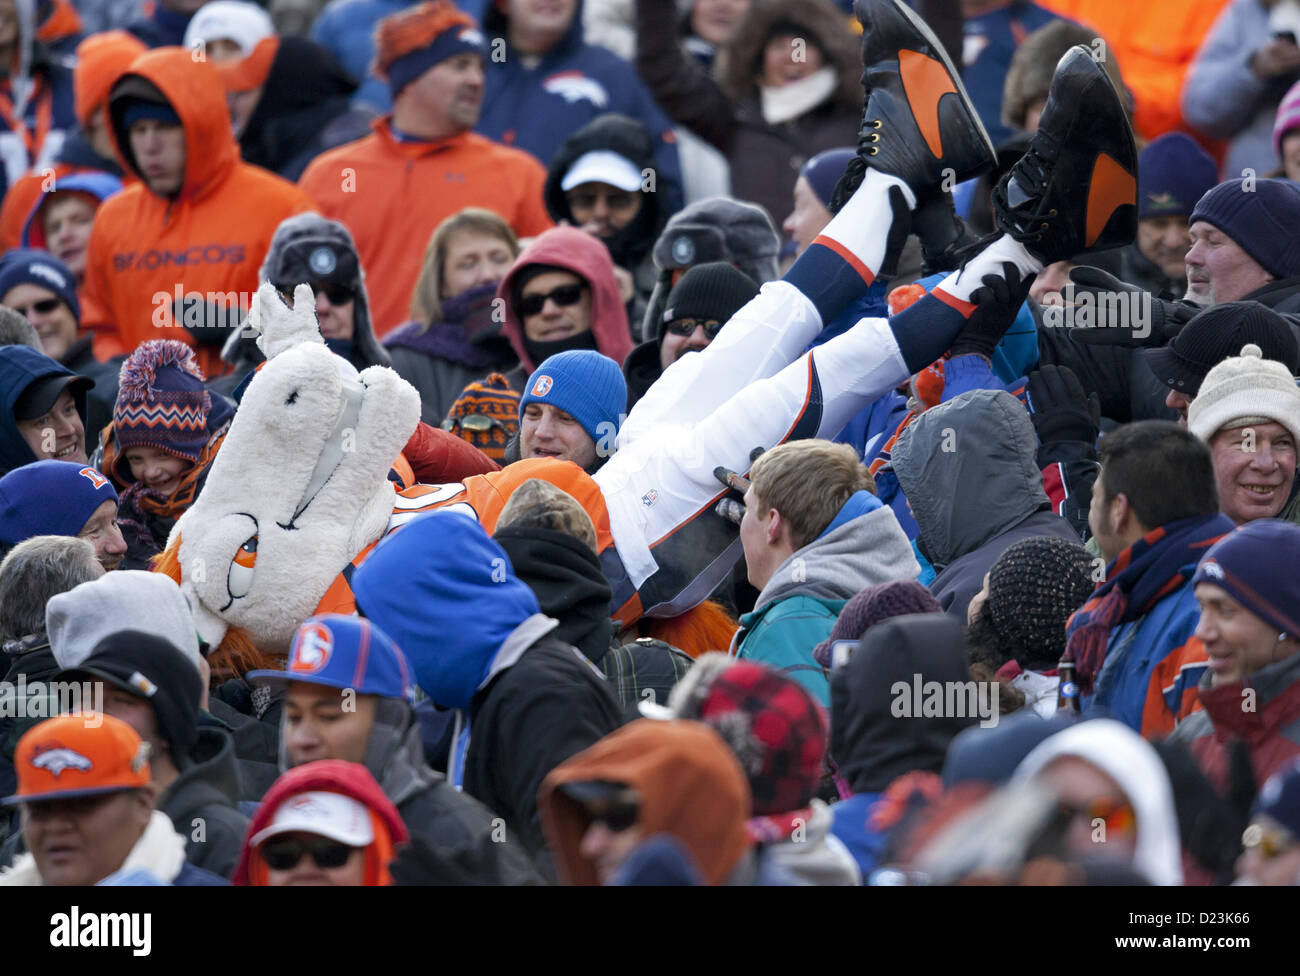 Denver, Colorado, USA. 12th January 2013. Denver Broncos mascot MILES does crowd surfing during the start of the game between the Broncos and the Ravens at Sports Authority Field at Mile High Saturday afternoon. The Broncos lose to the Ravens 38-35 in Double OT. (Credit Image: © Hector Acevedo/ZUMAPRESS.com) Stock Photo